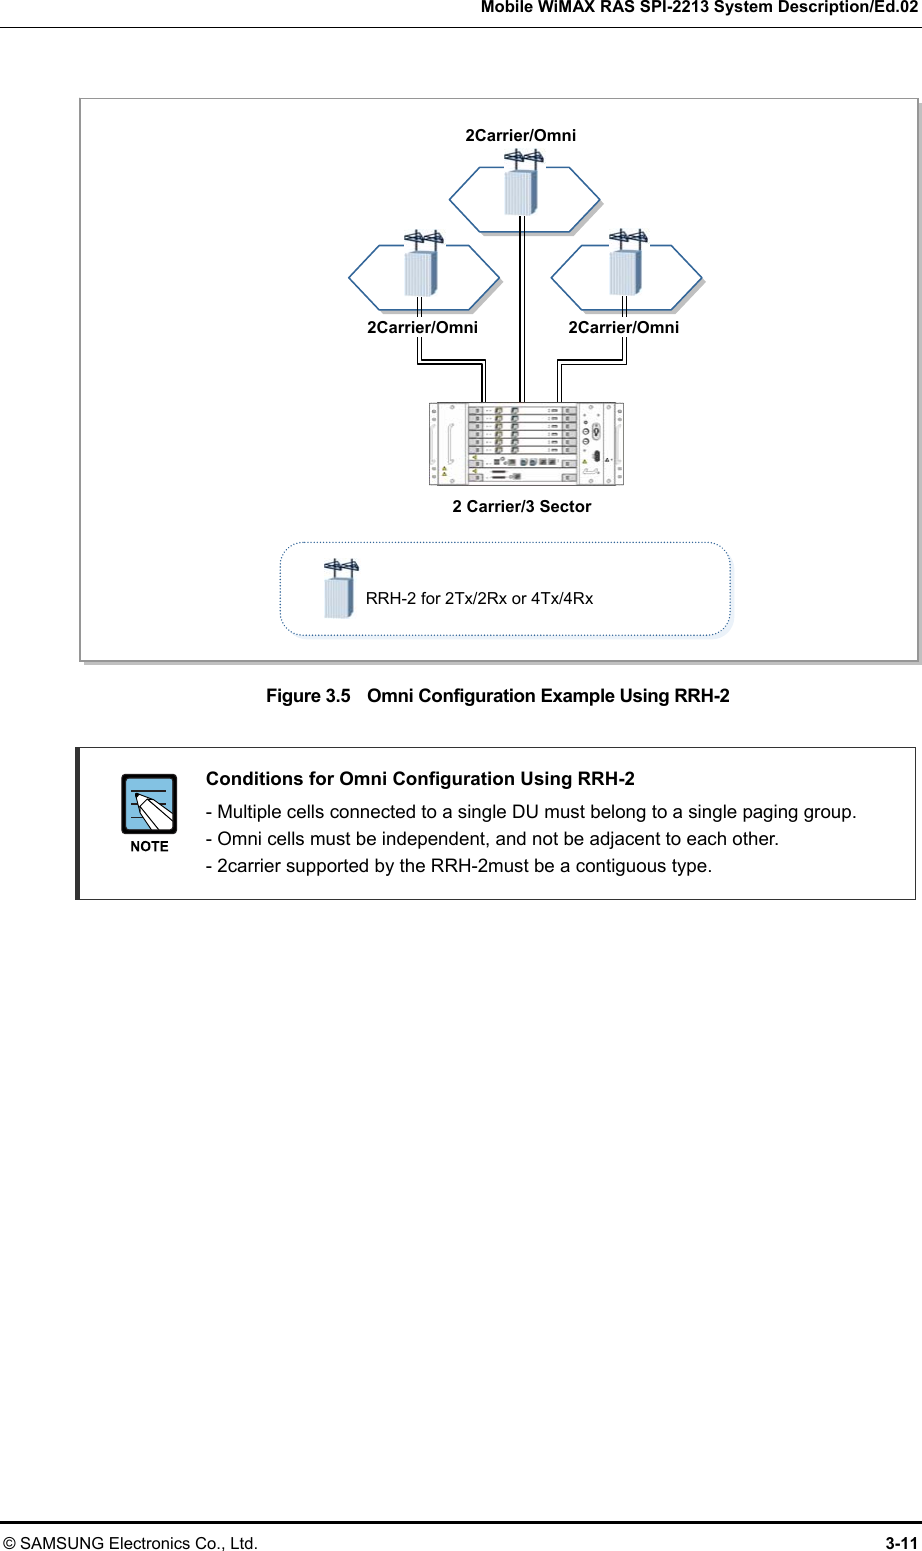   Mobile WiMAX RAS SPI-2213 System Description/Ed.02 © SAMSUNG Electronics Co., Ltd.  3-11  Figure 3.5    Omni Configuration Example Using RRH-2    Conditions for Omni Configuration Using RRH-2   - Multiple cells connected to a single DU must belong to a single paging group. - Omni cells must be independent, and not be adjacent to each other. - 2carrier supported by the RRH-2must be a contiguous type.  2Carrier/Omni2 Carrier/3 Sector 2Carrier/Omni2Carrier/OmniRRH-2 for 2Tx/2Rx or 4Tx/4Rx 